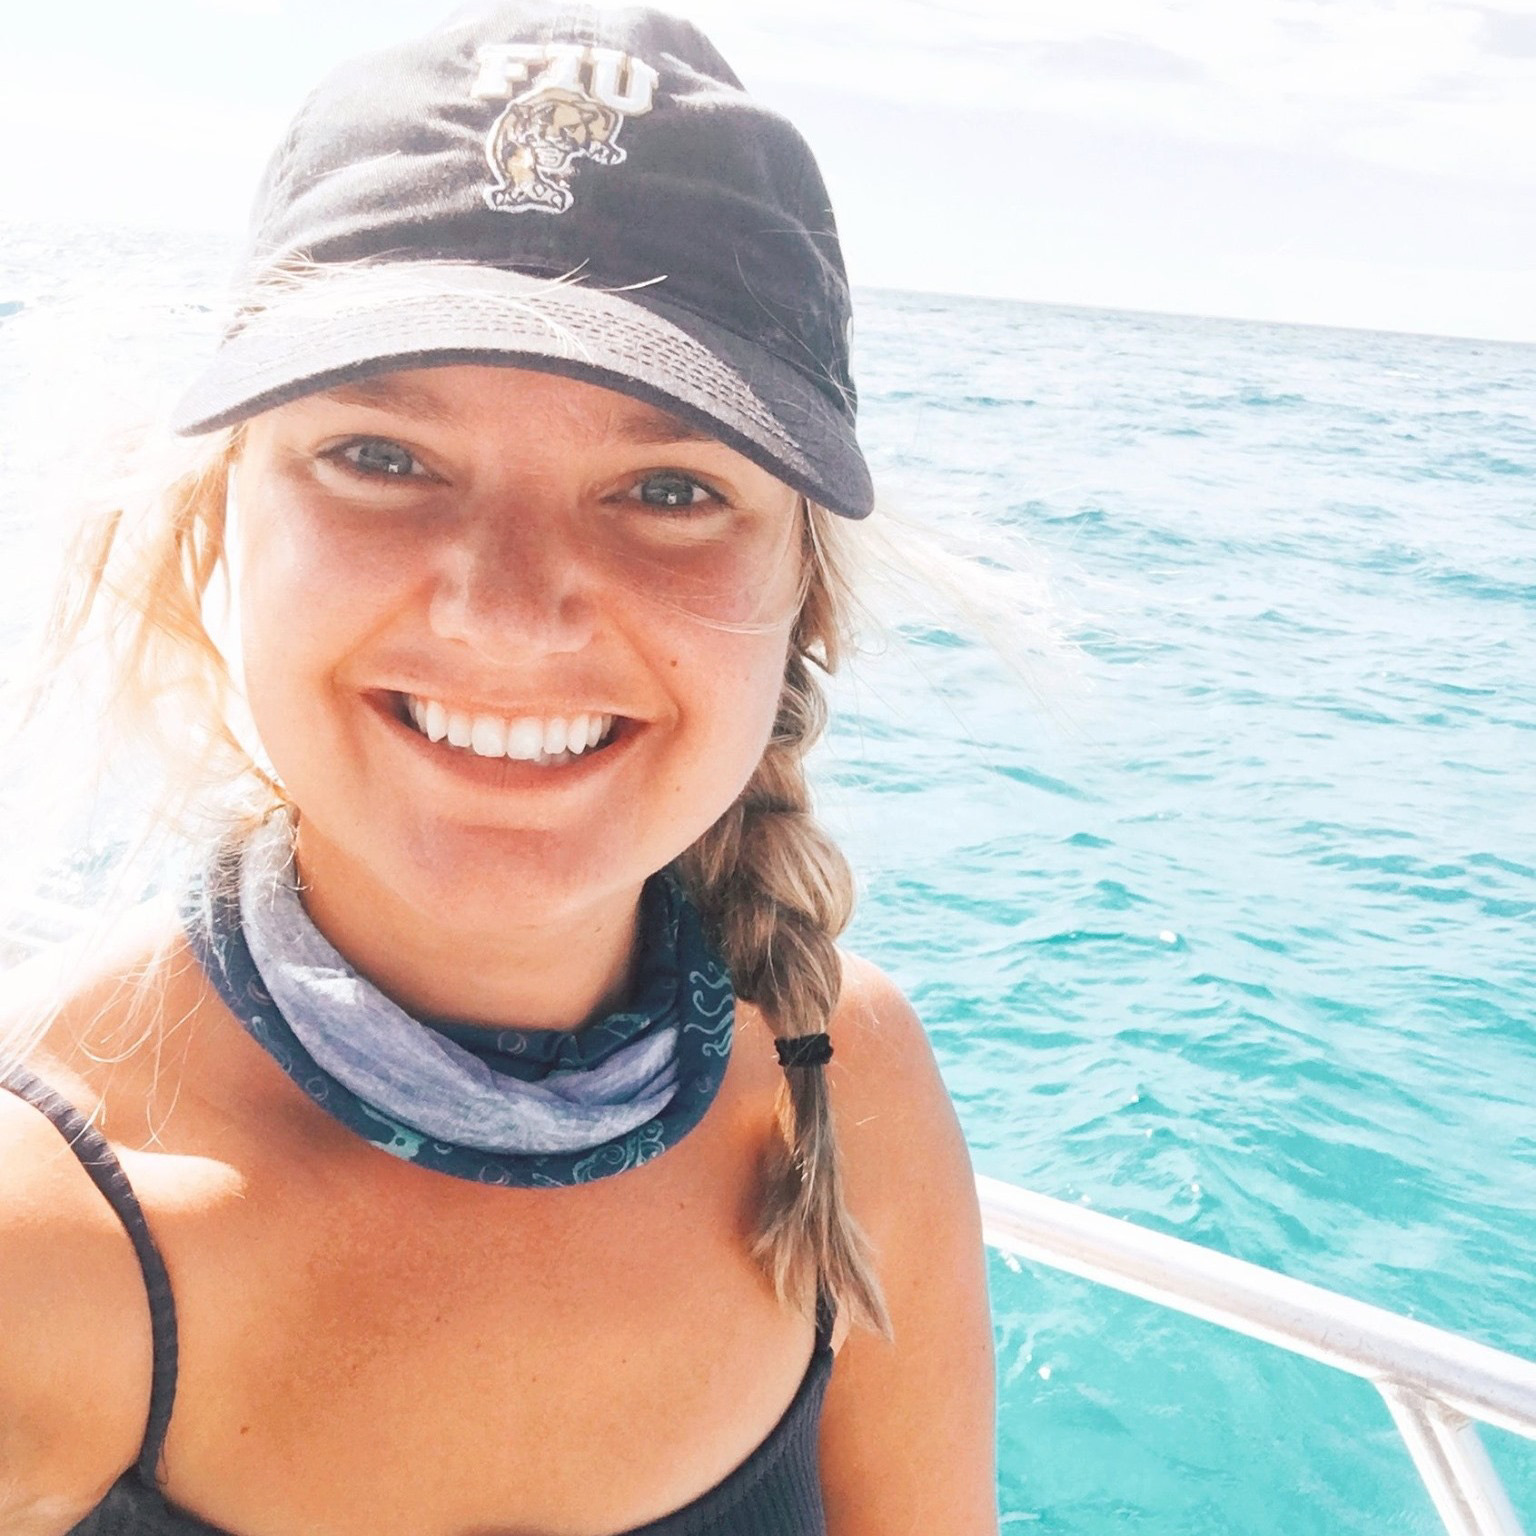 Field work days are the best days, especially when it means you're on the water in the Bahamas! PC: Erin Spencer